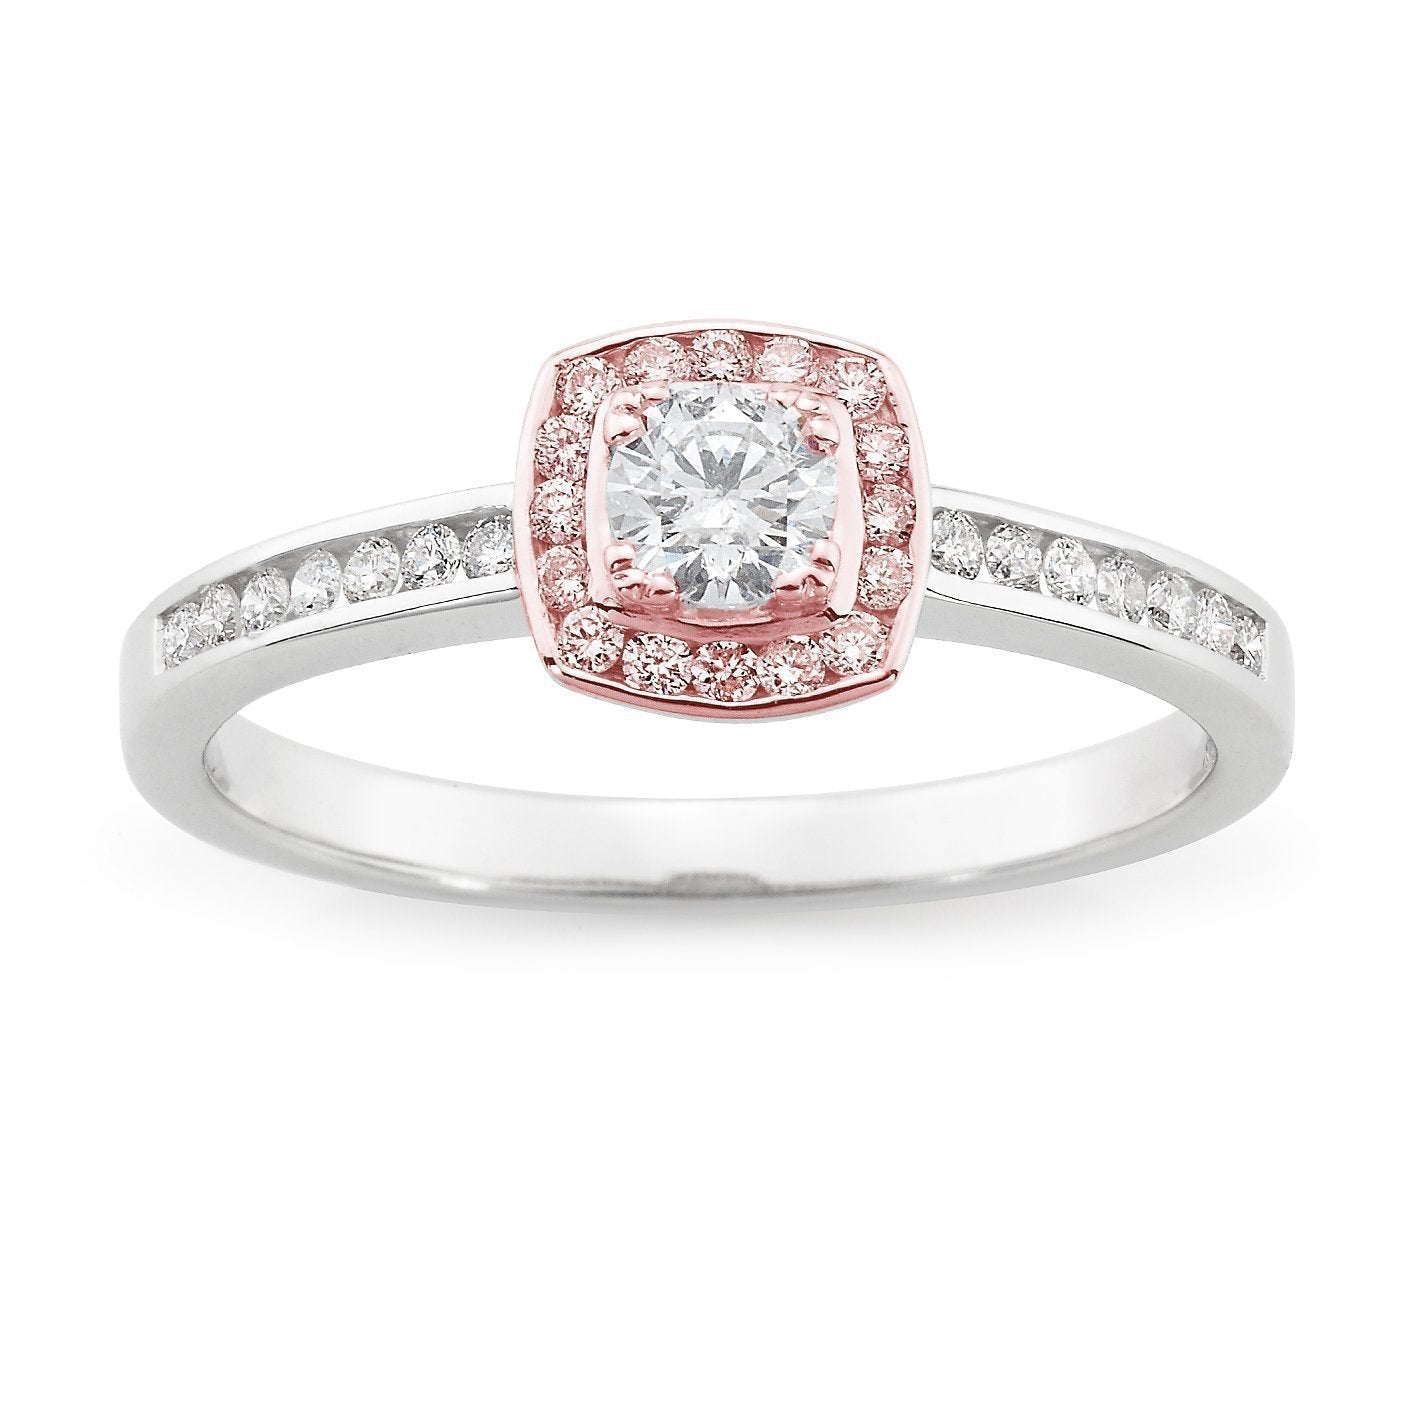 PINK CAVIAR 0.39ct Pink Diamond Halo Engagement Ring in 9ct White & Rose Gold